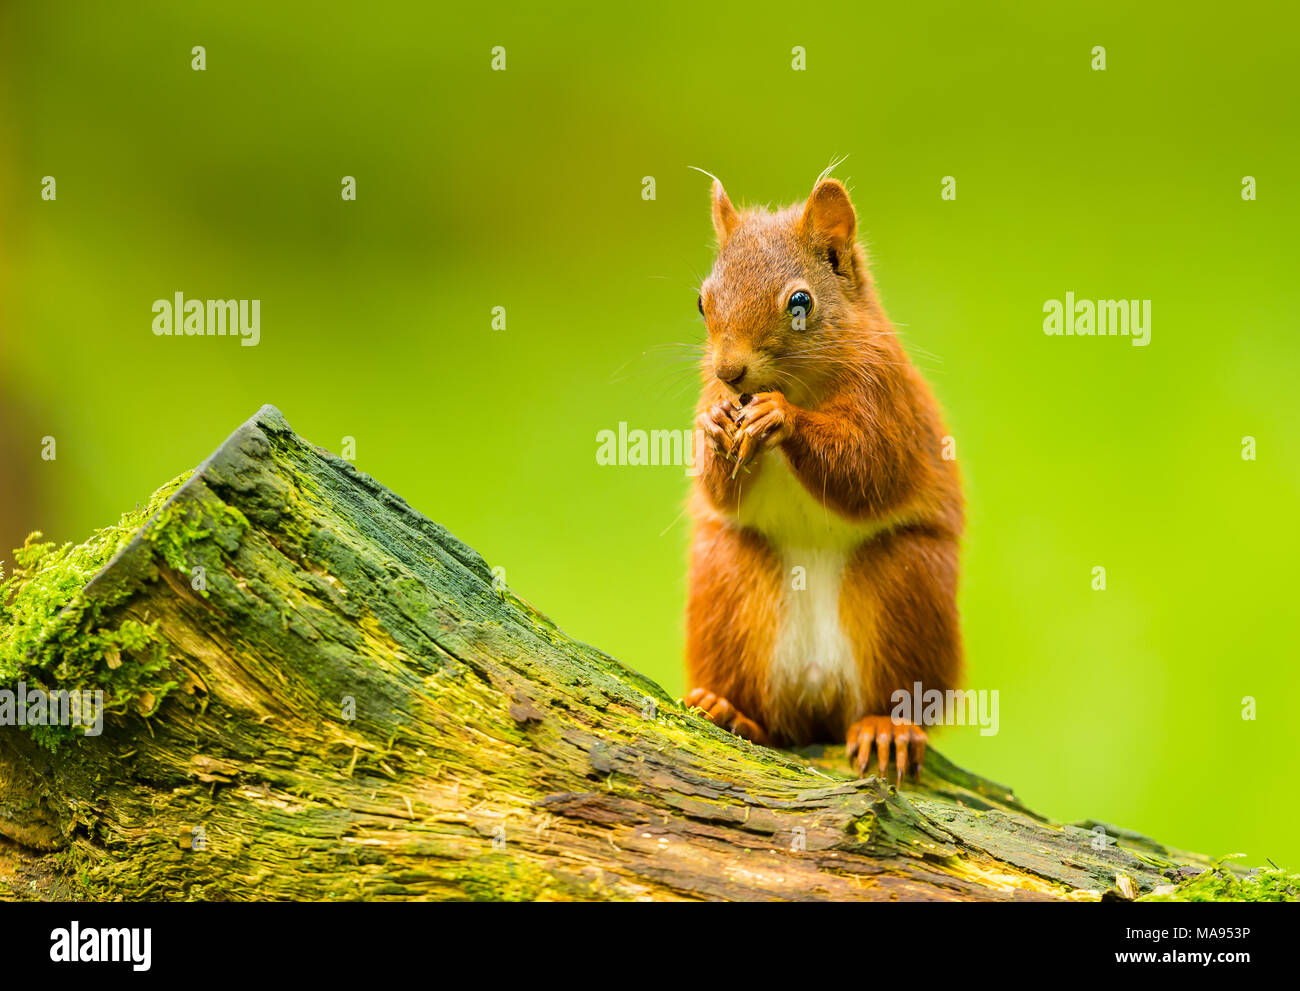 Baby Red Squirrel, Sciurus vulgaris, sat on a tree stump eating a nut.  Facing left.  Bright green background.  Landscape. Stock Photo